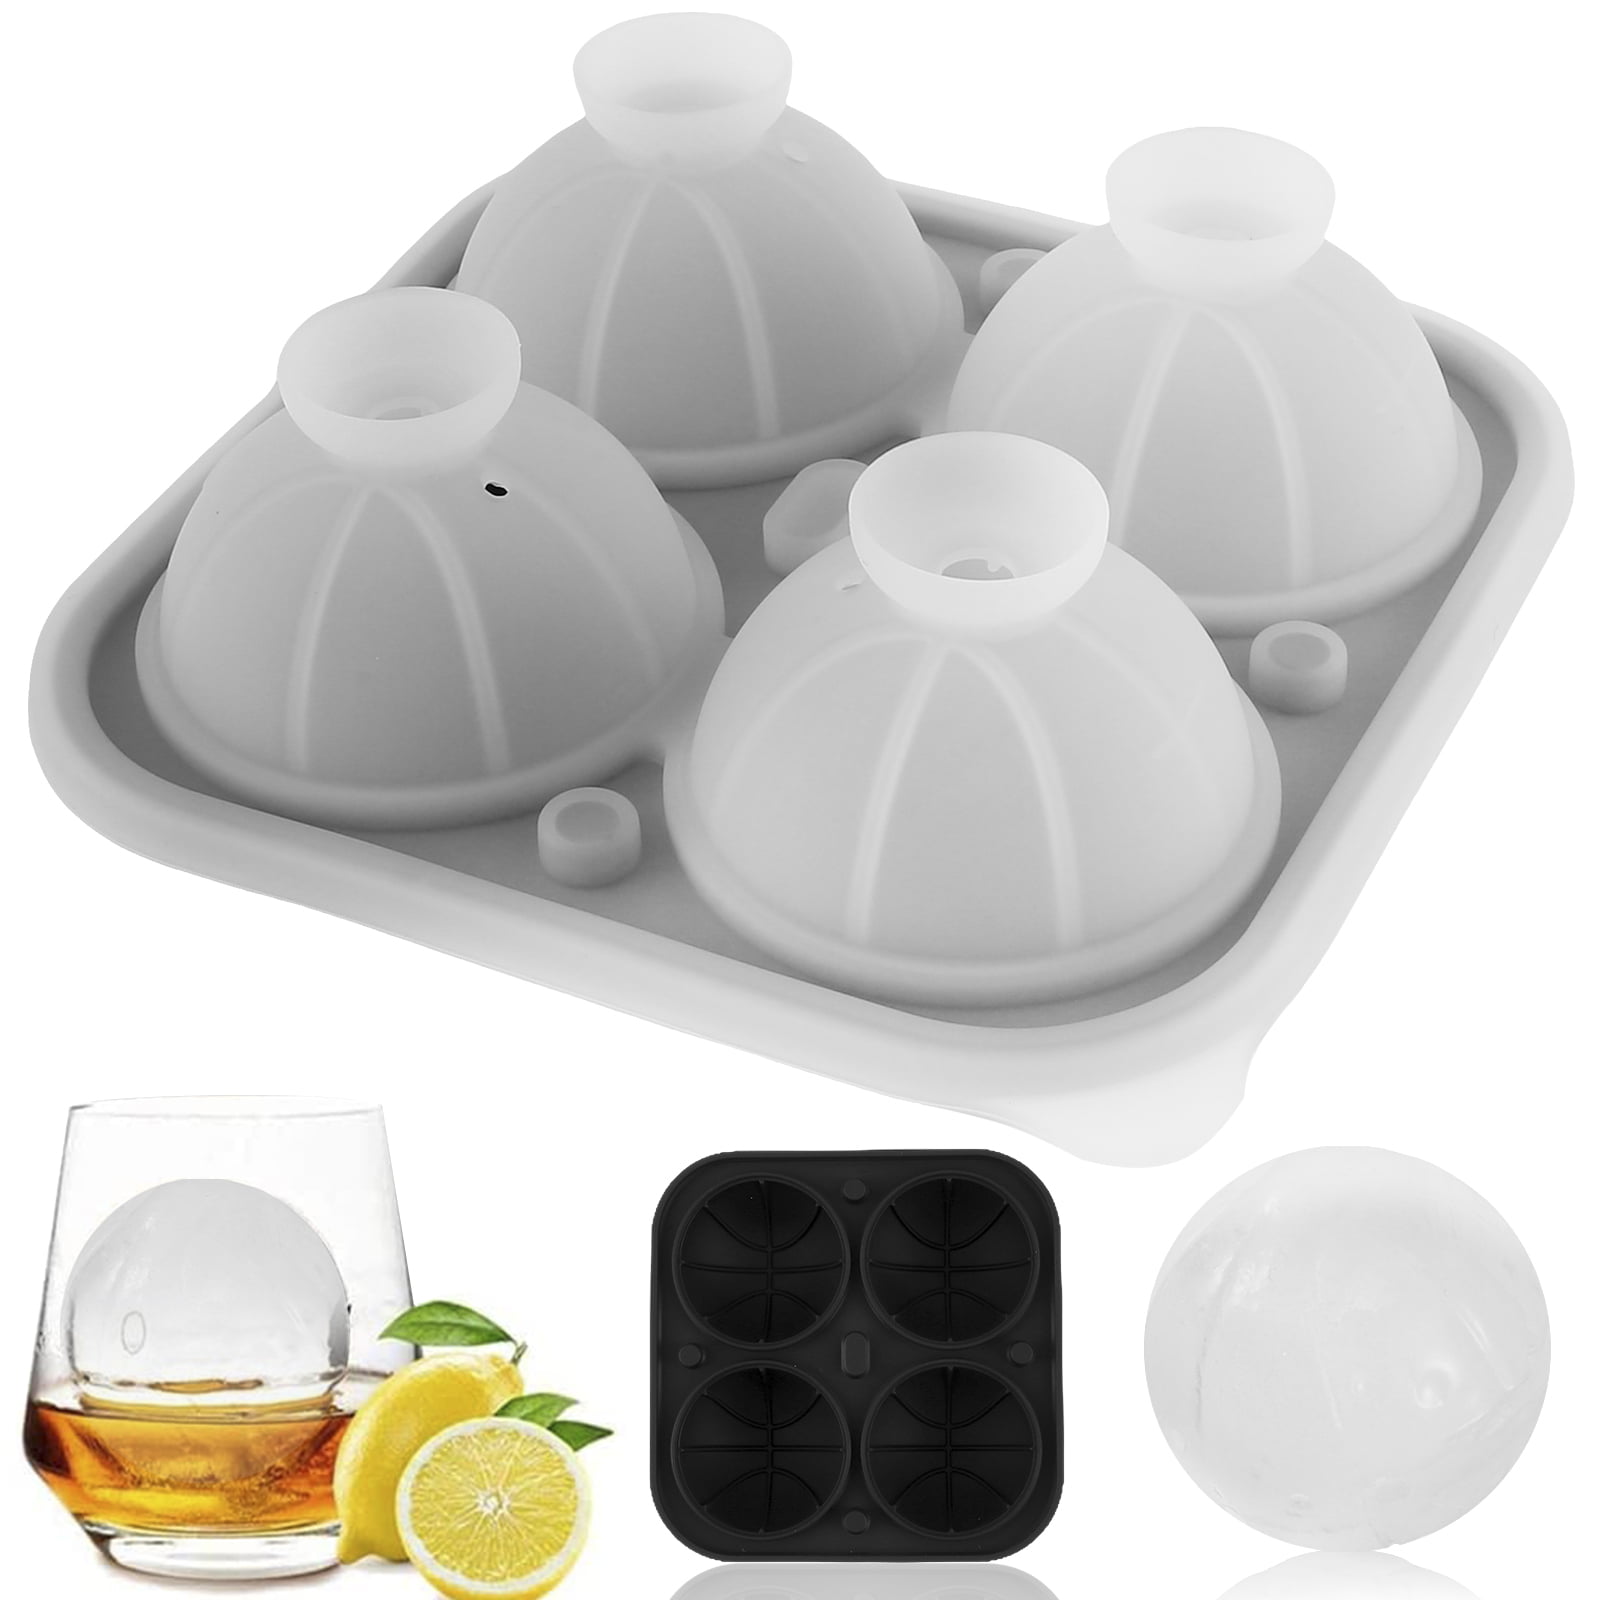 33 Grid Ice Cube Trays For Freezer Ice Ball Maker Mold Mini Circle Round Ice  Cube Mold with Lid Making PCs for Cocktail Whiskey - AliExpress